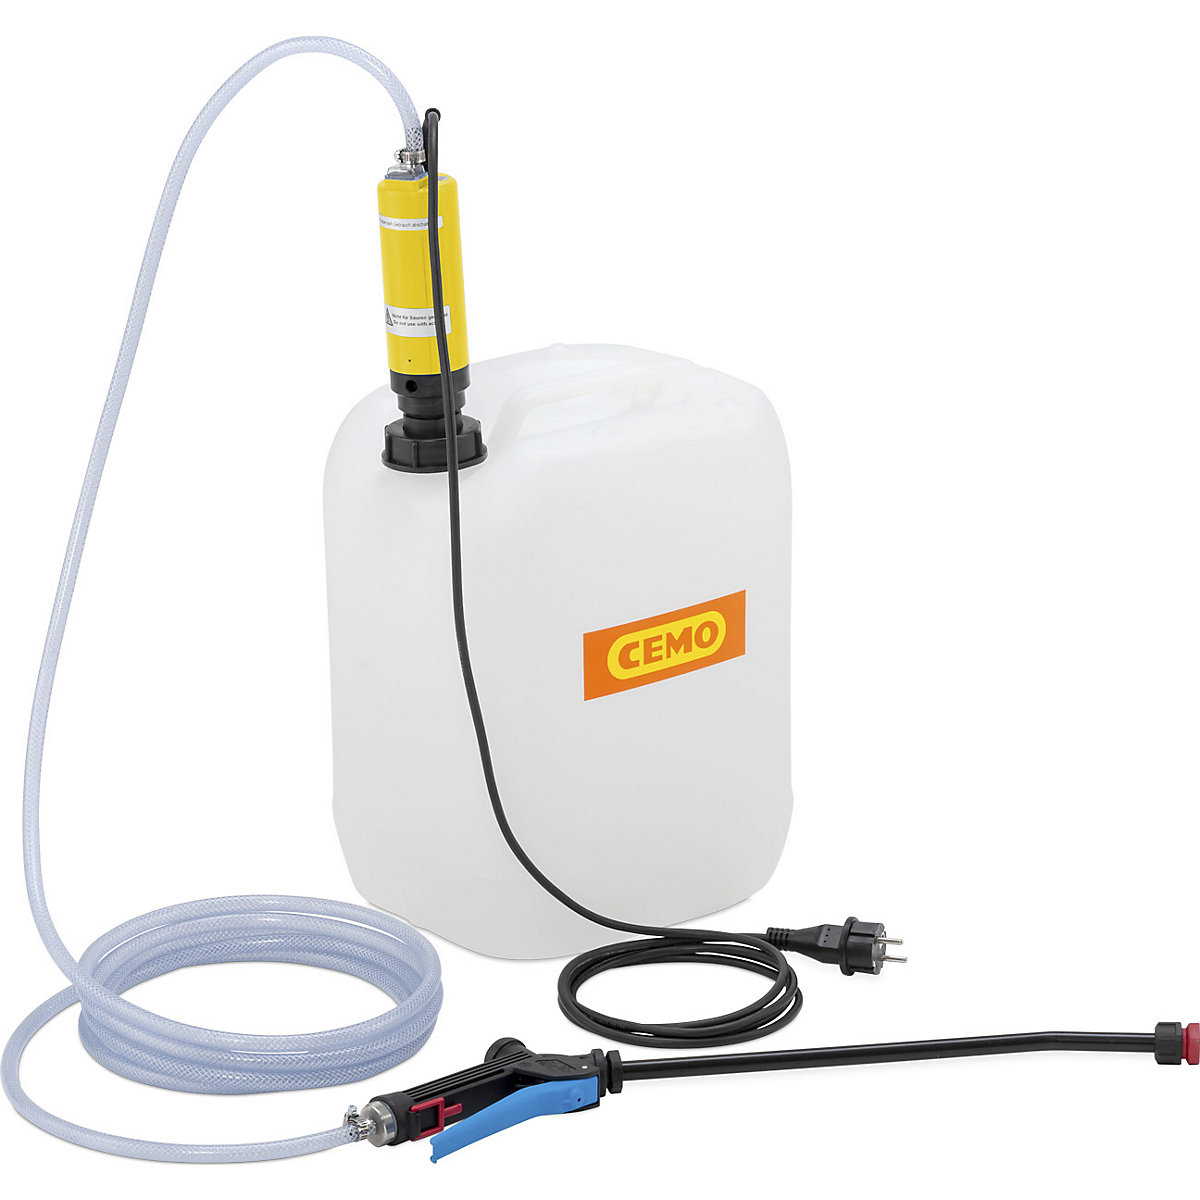 Electric sprayer with canister for disinfectant solutions - CEMO